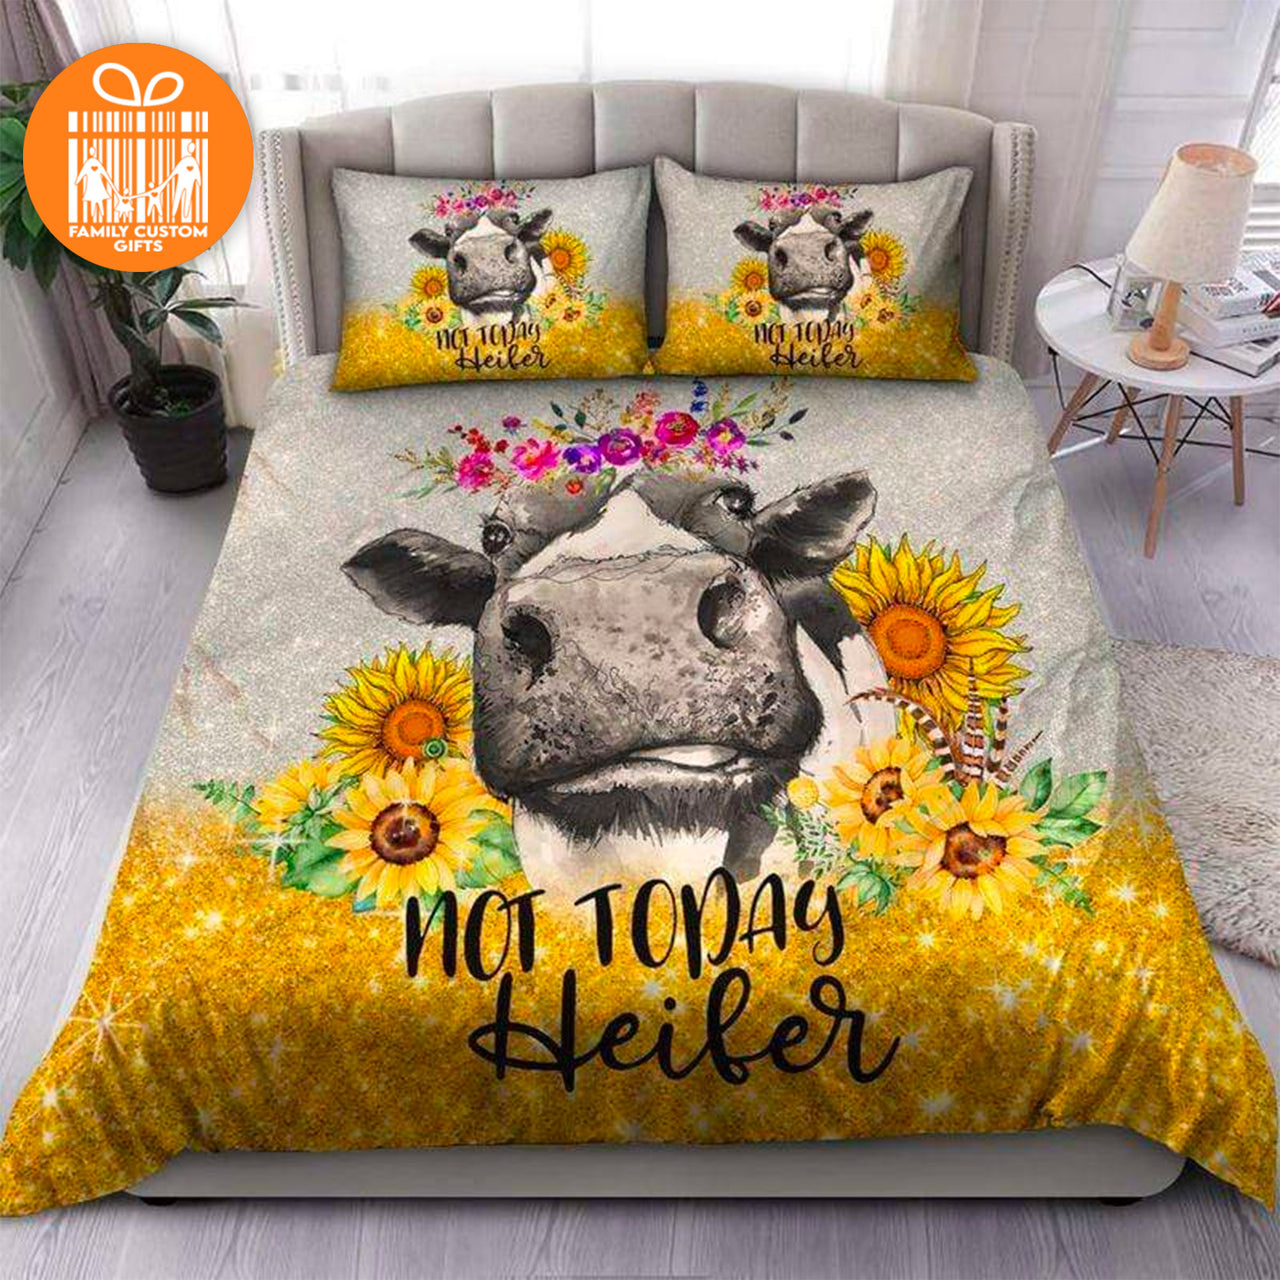 Comforter Funny Cow Not Today Heifer Custom Bedding Set for Kids Teens Adult Personalized Premium Bed Set